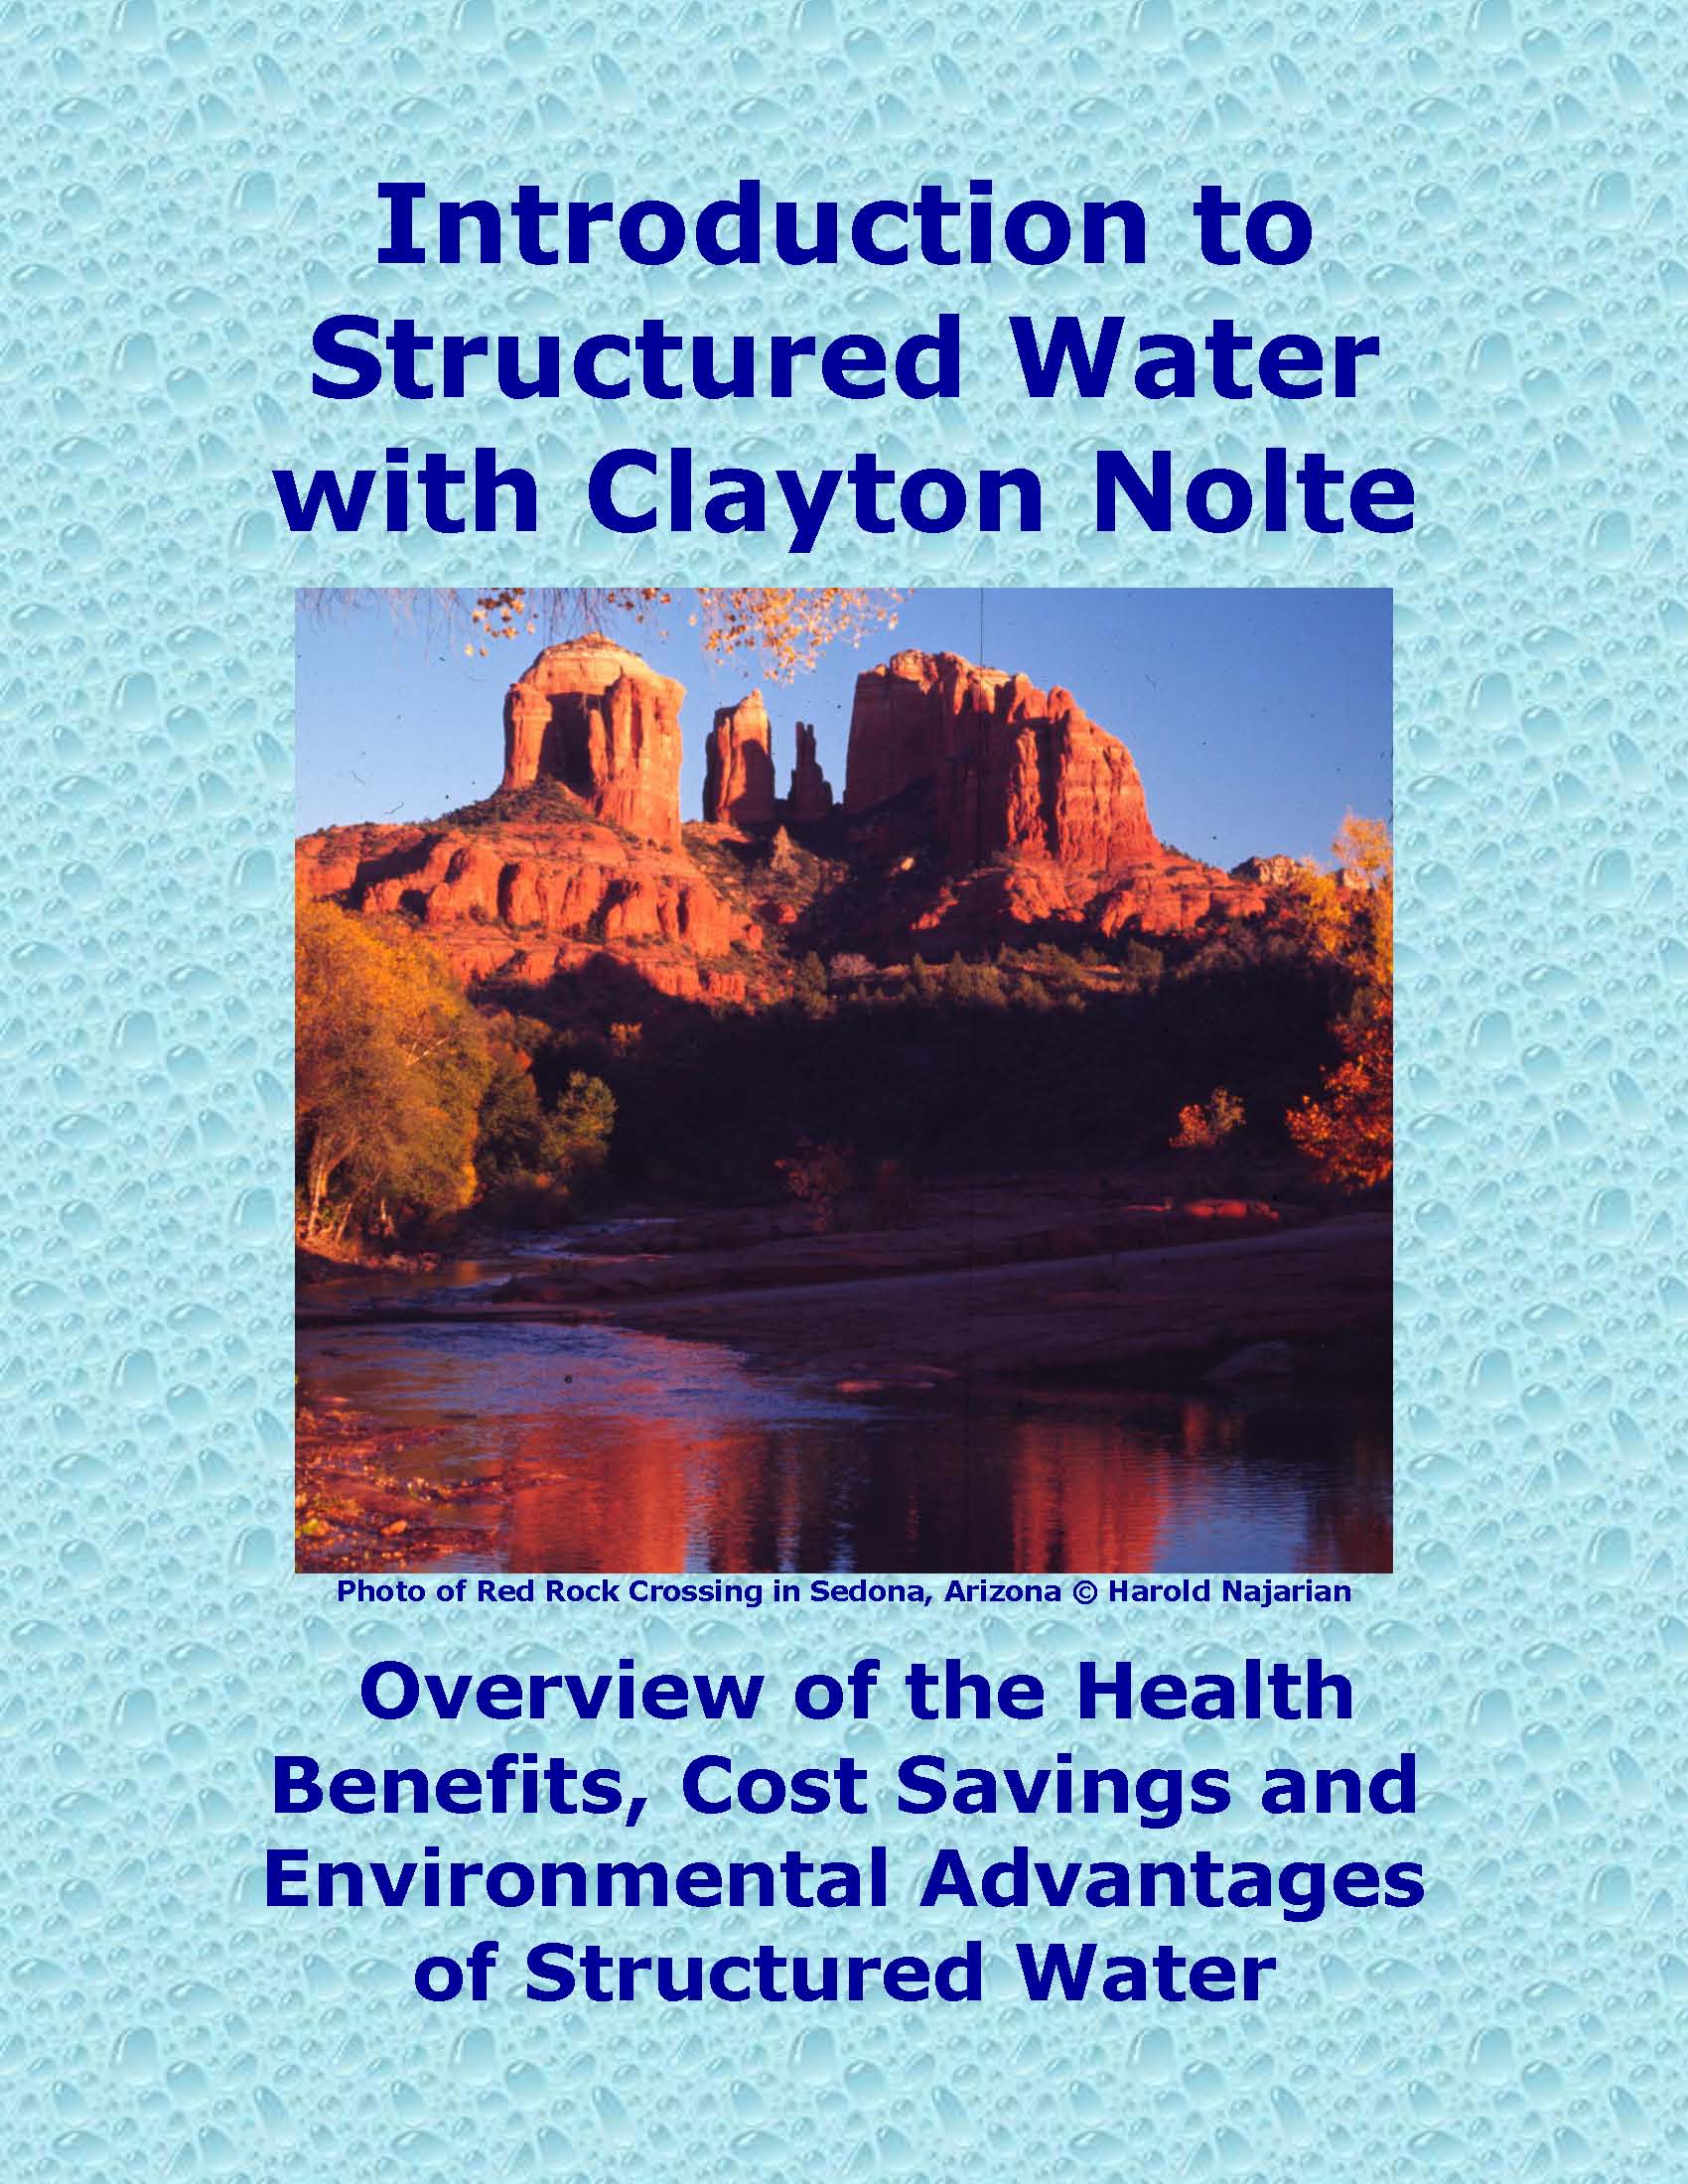 Introduction to Structured Water with Clayton Nolte--Overview of the Health Benefits, Cost Savings, and Environmental Advantages of Structured Water